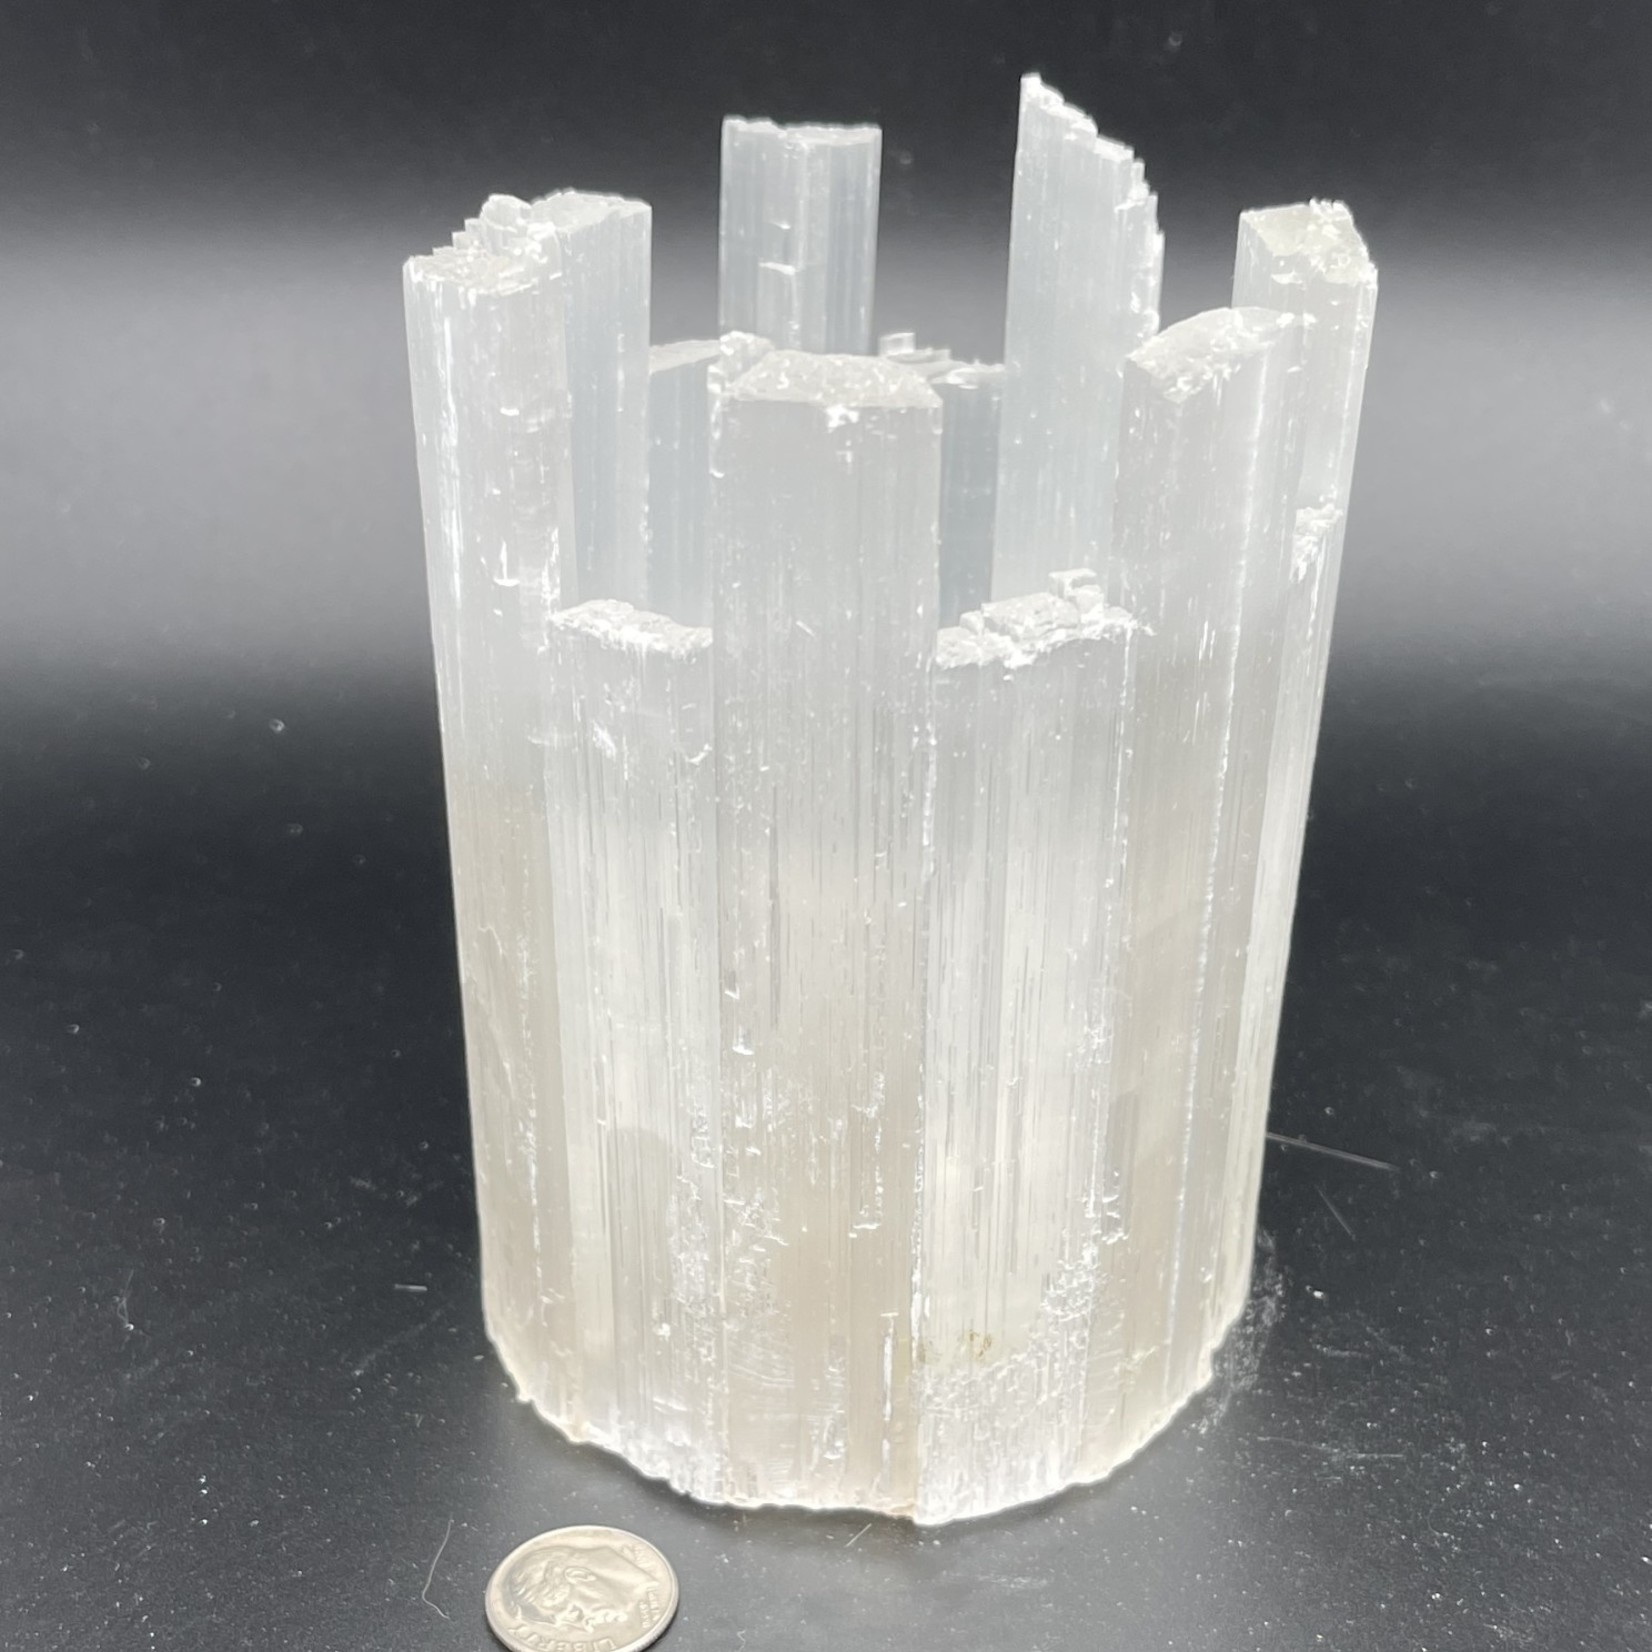 Selenite - Candle Holder from Wands